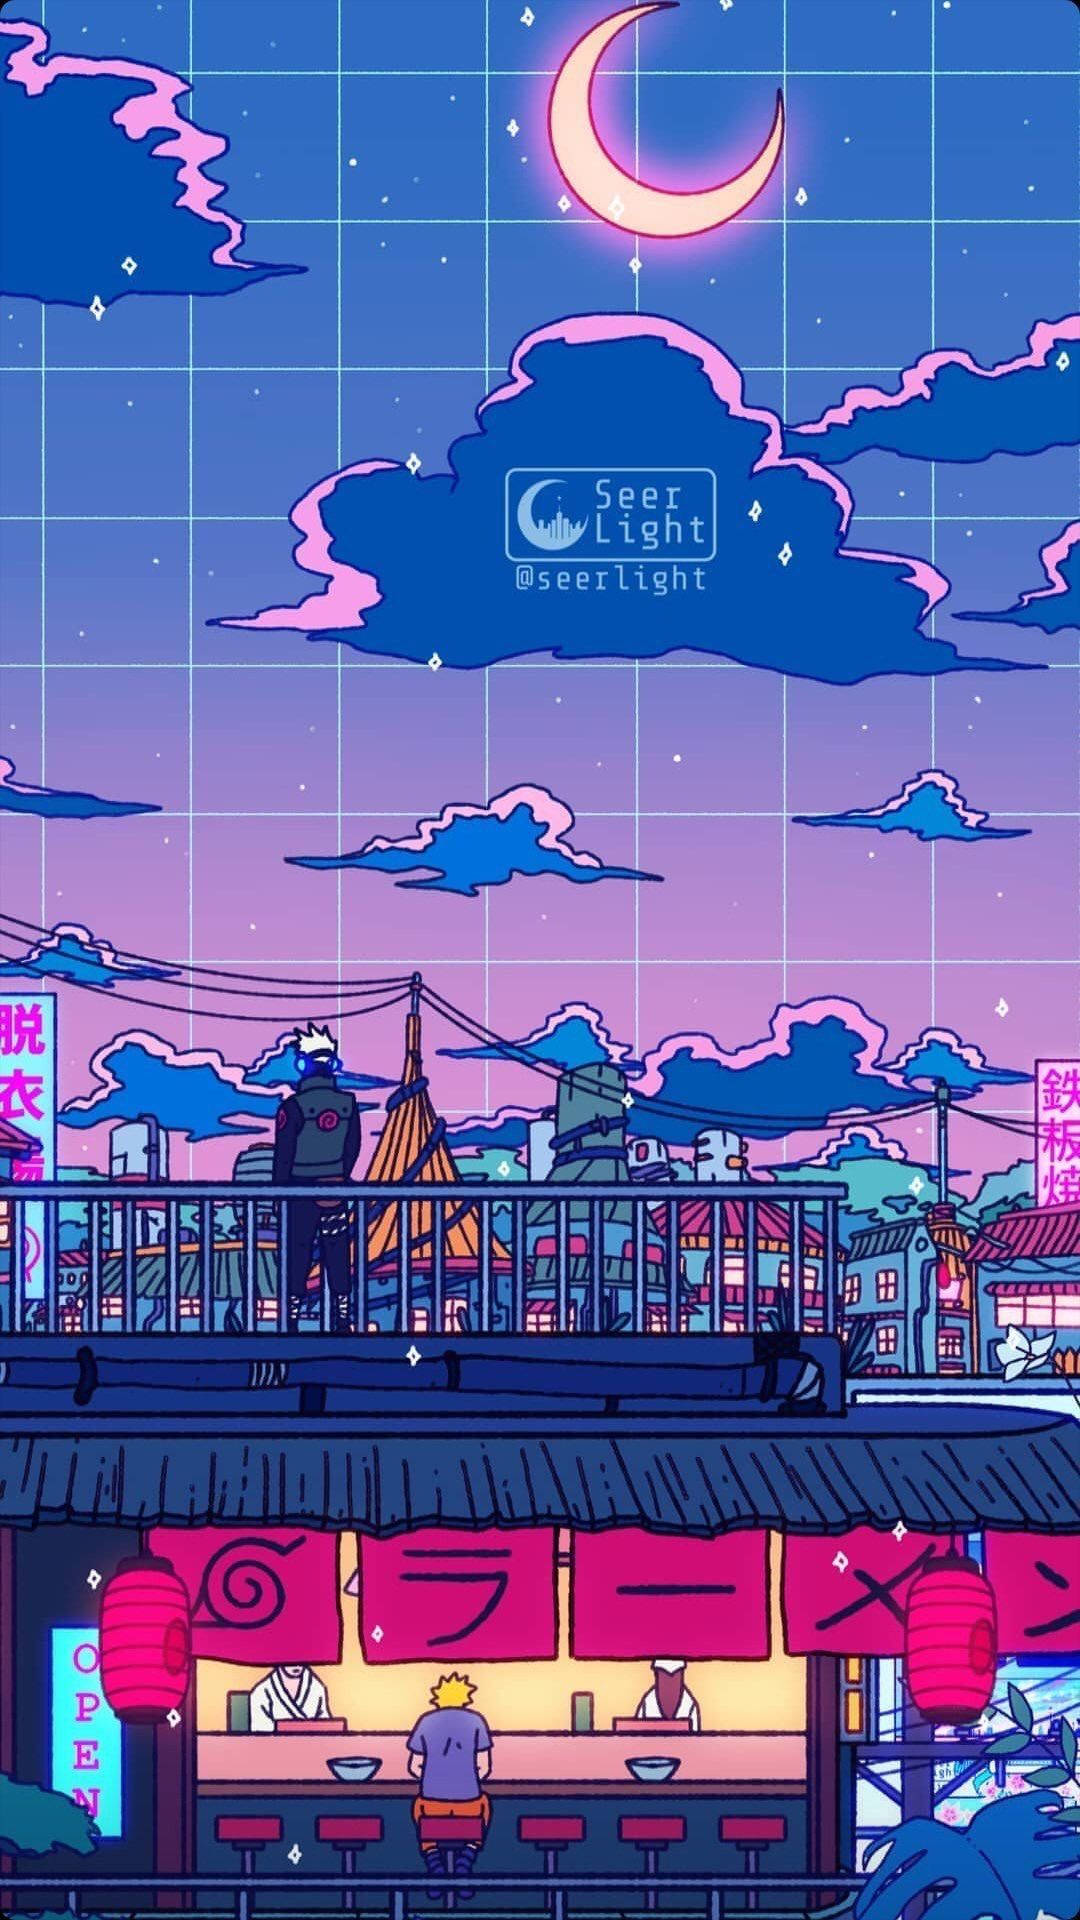 Background Wallpaper 4K for PC: Cozy Cat lo-fi vibe at night